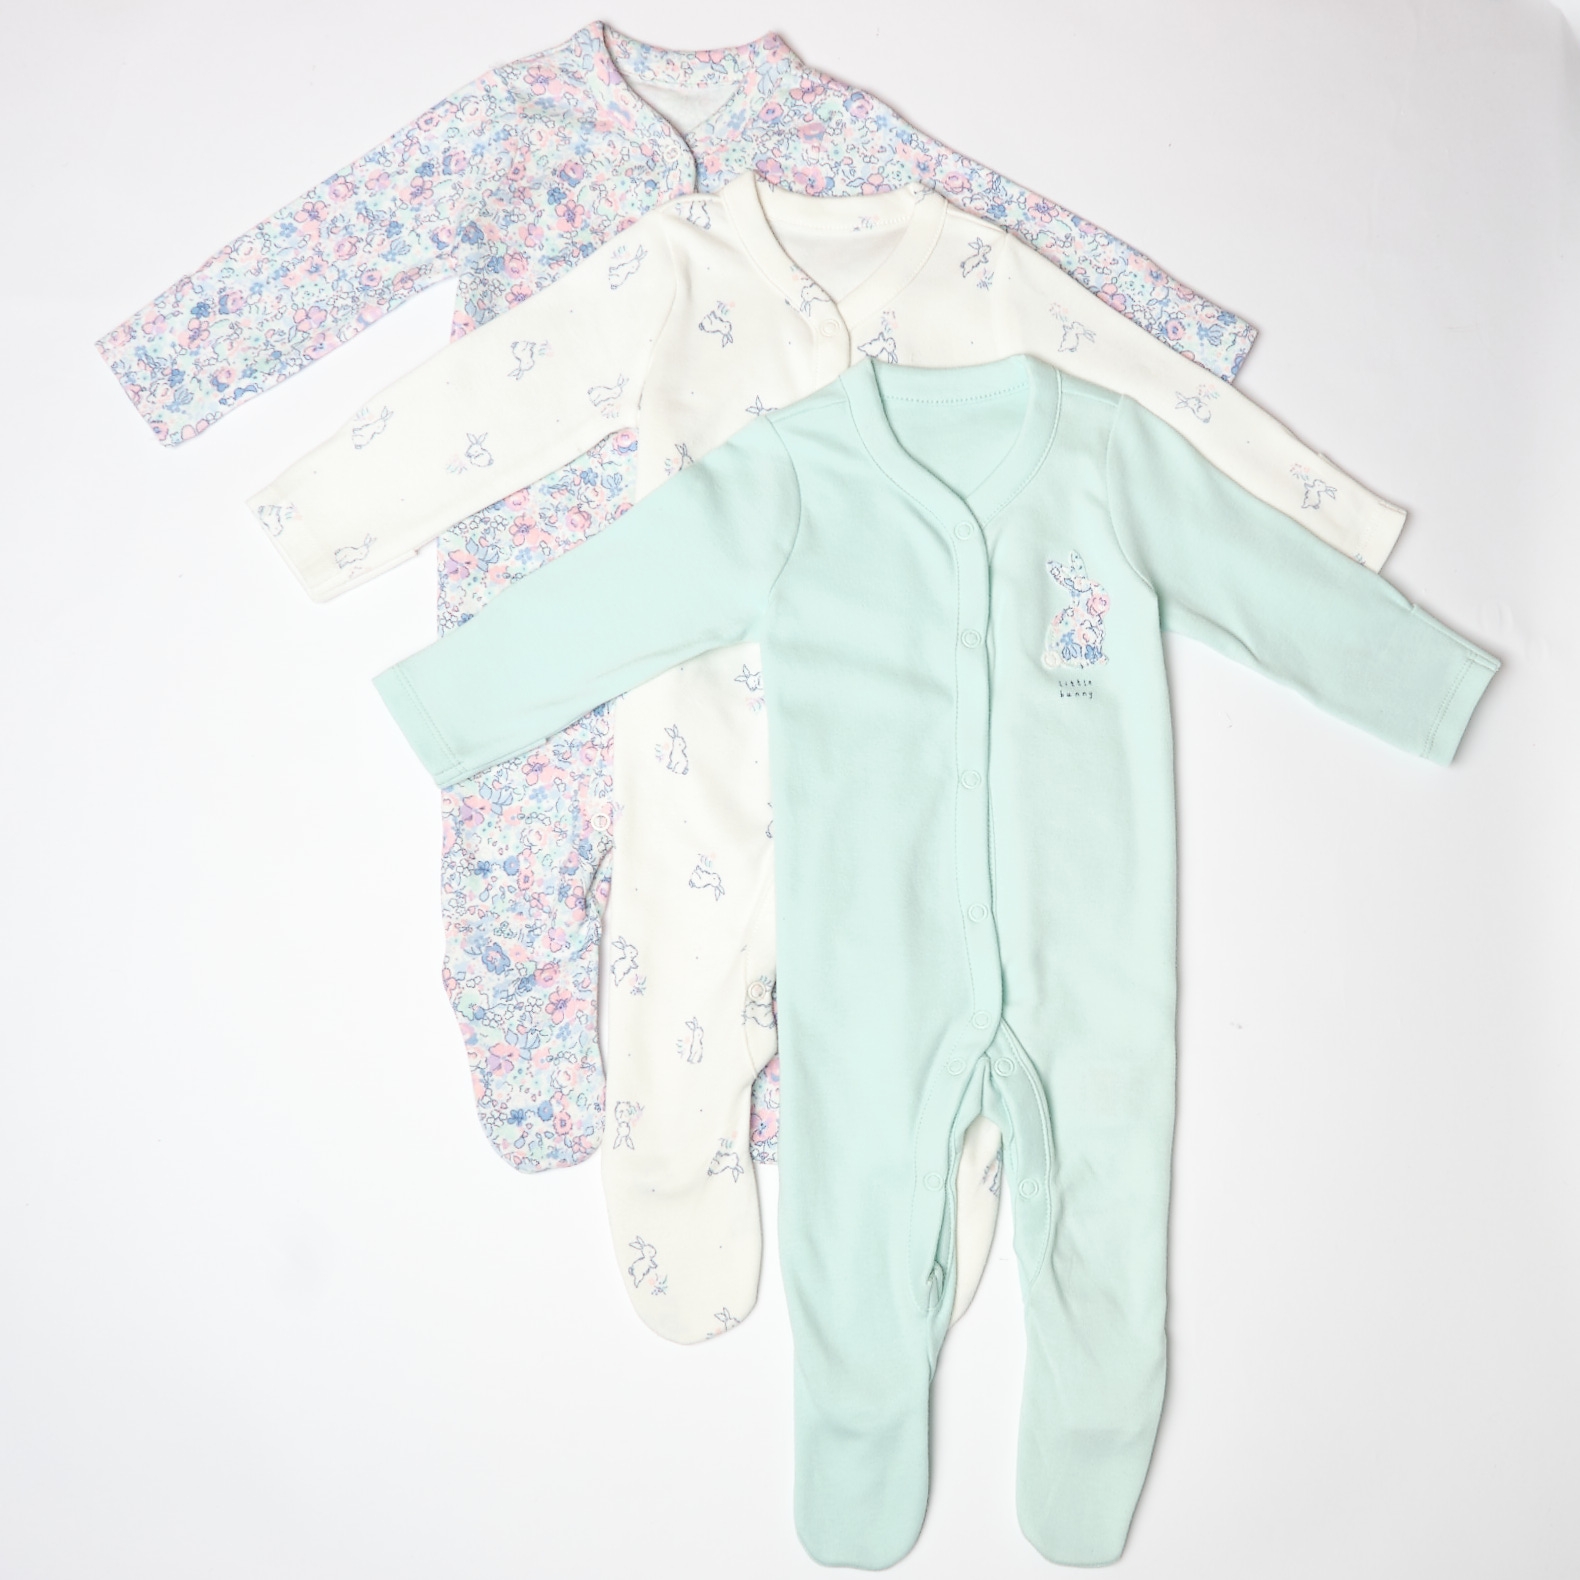 Mothercare | Girls Full Sleeves Sleepsuit Bunny And Floral Print - Pack Of 3 - Blue